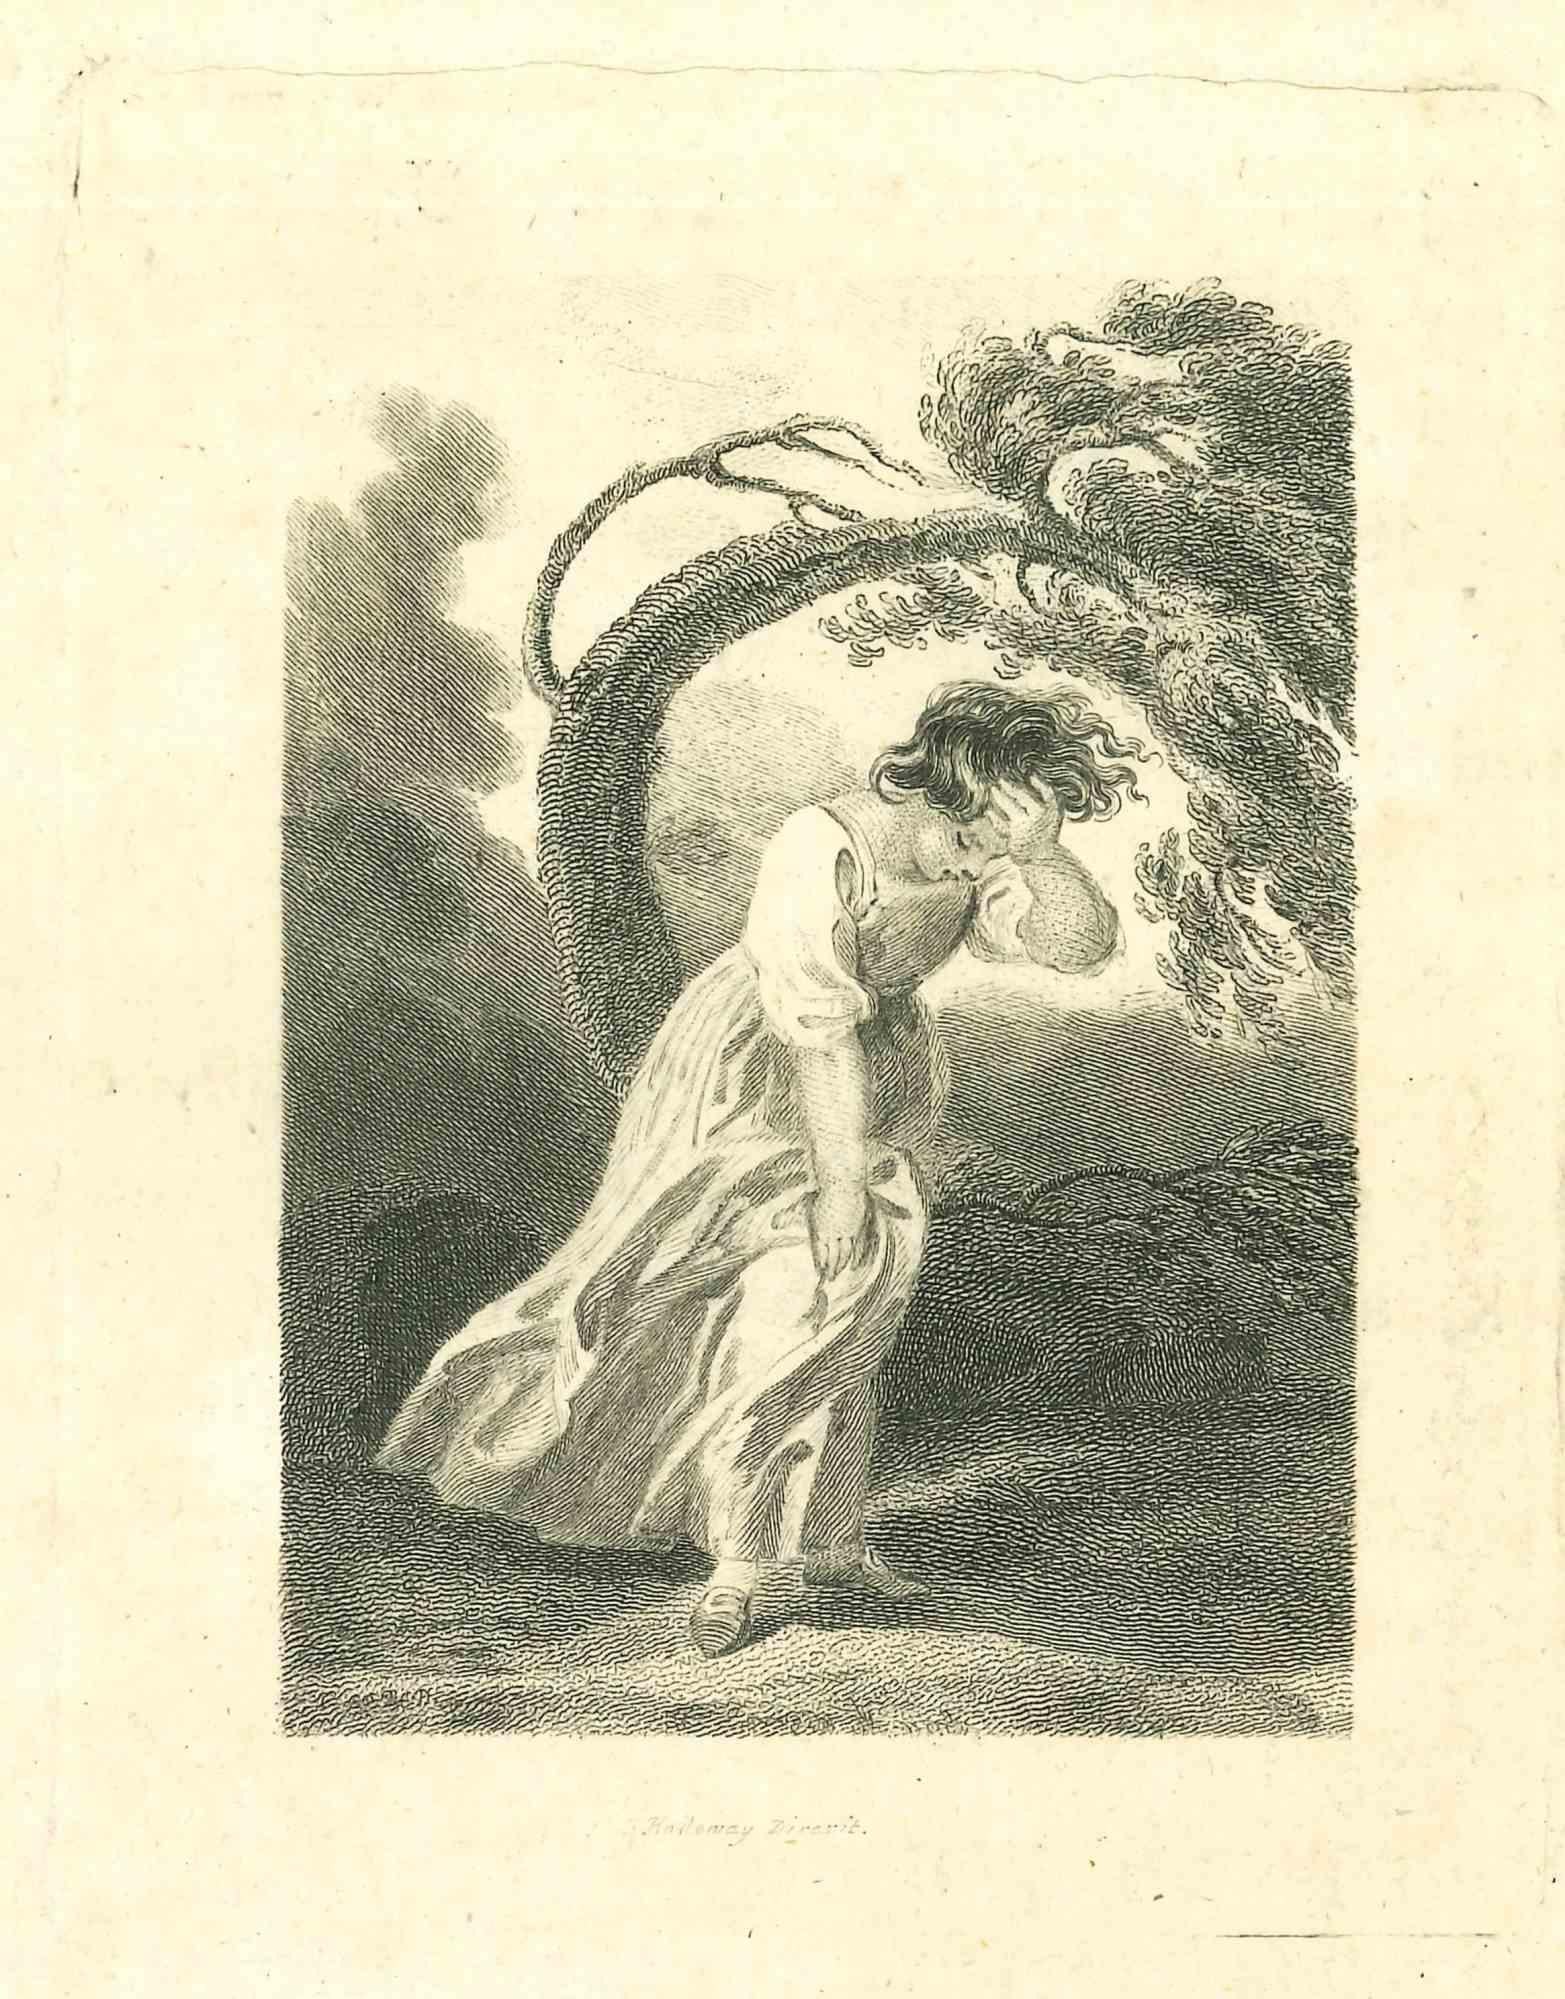 Lost in the Nature - Original Etching by Thomas Holloway - 1810